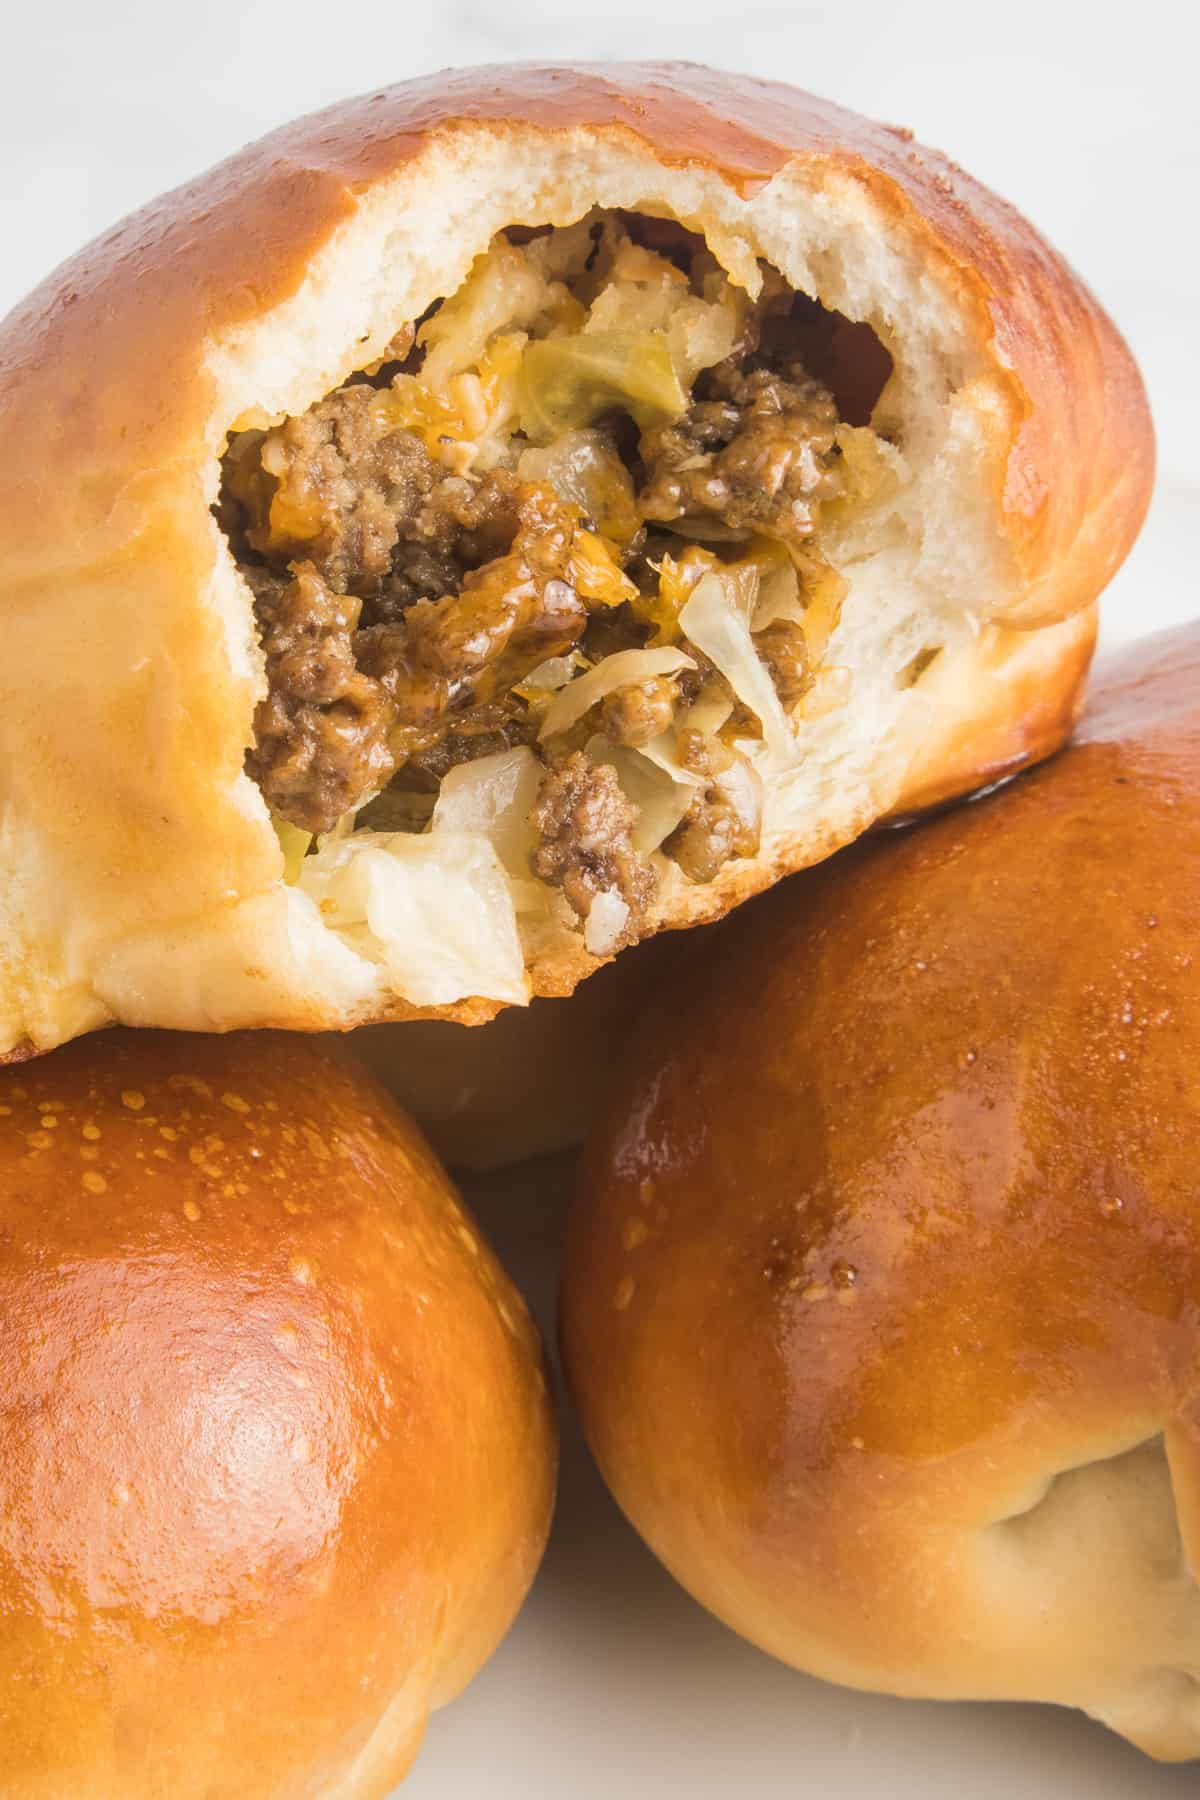 This image showcases a close-up shot of a runza, with a bite taken out of it, revealing the delicious contents inside. The runza is filled with meat, cheese, and shreaded cabbbage. It is placed on top of two unbitten runzas, forming a stack.